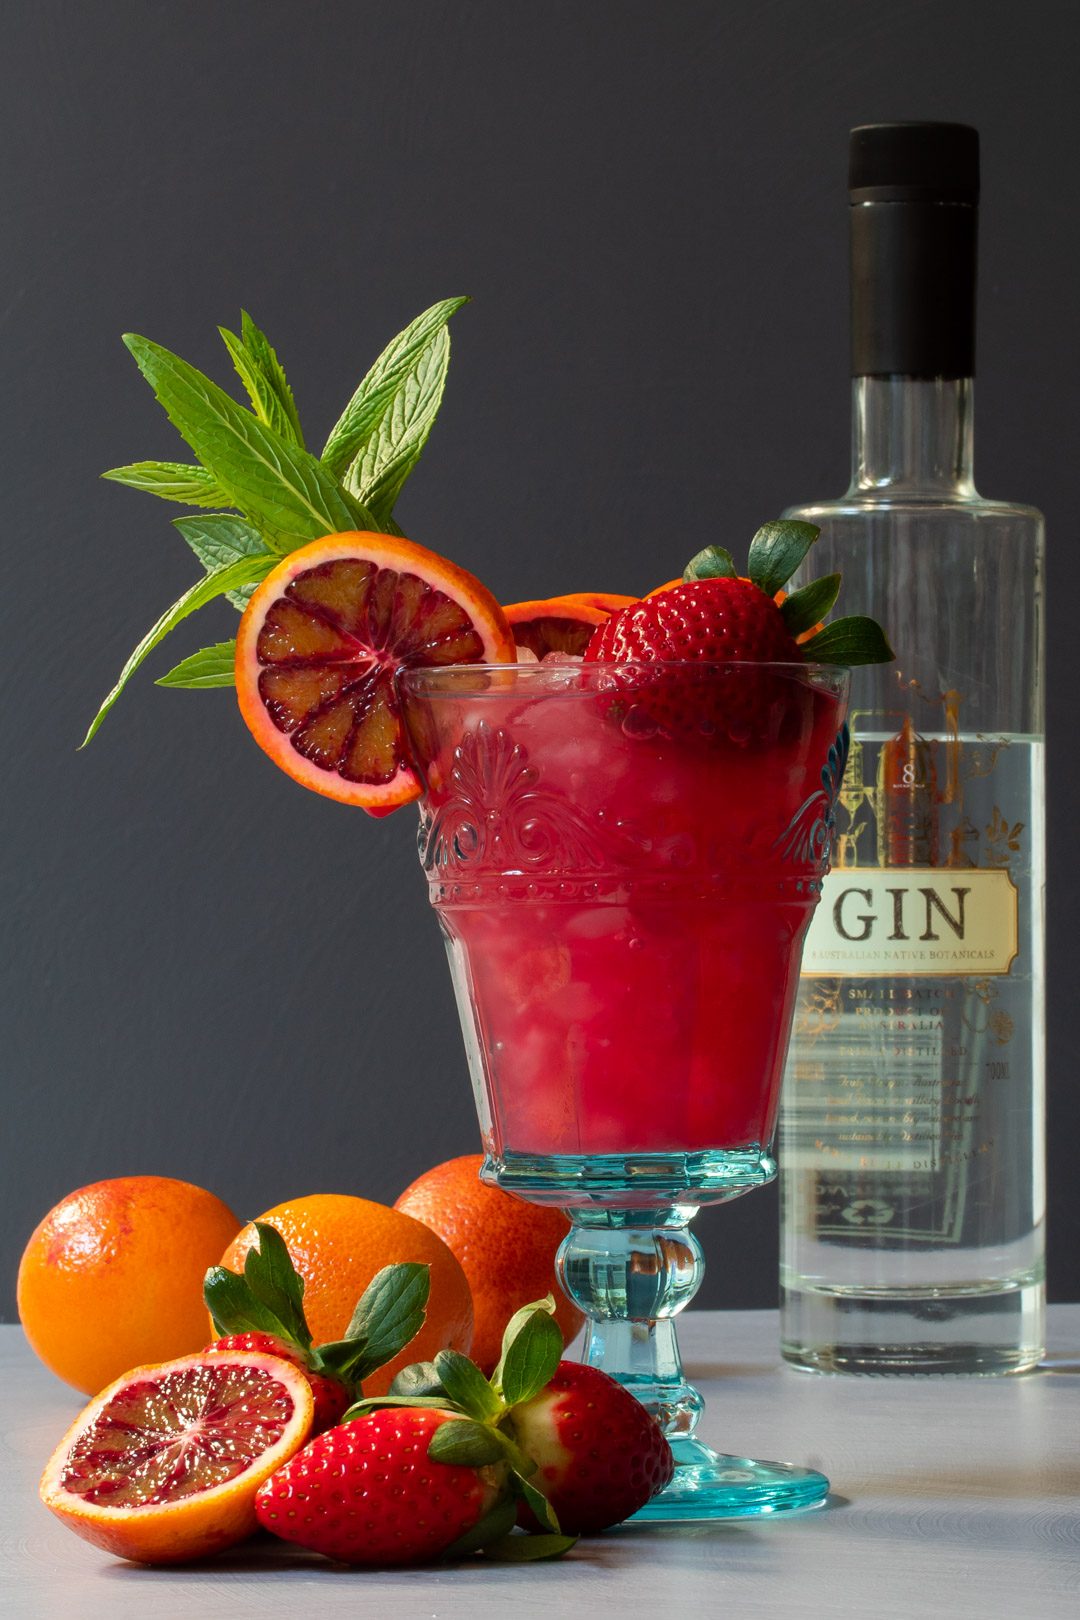 Blood orange pomegranate gin Daisy cocktail | Peck of Pickles